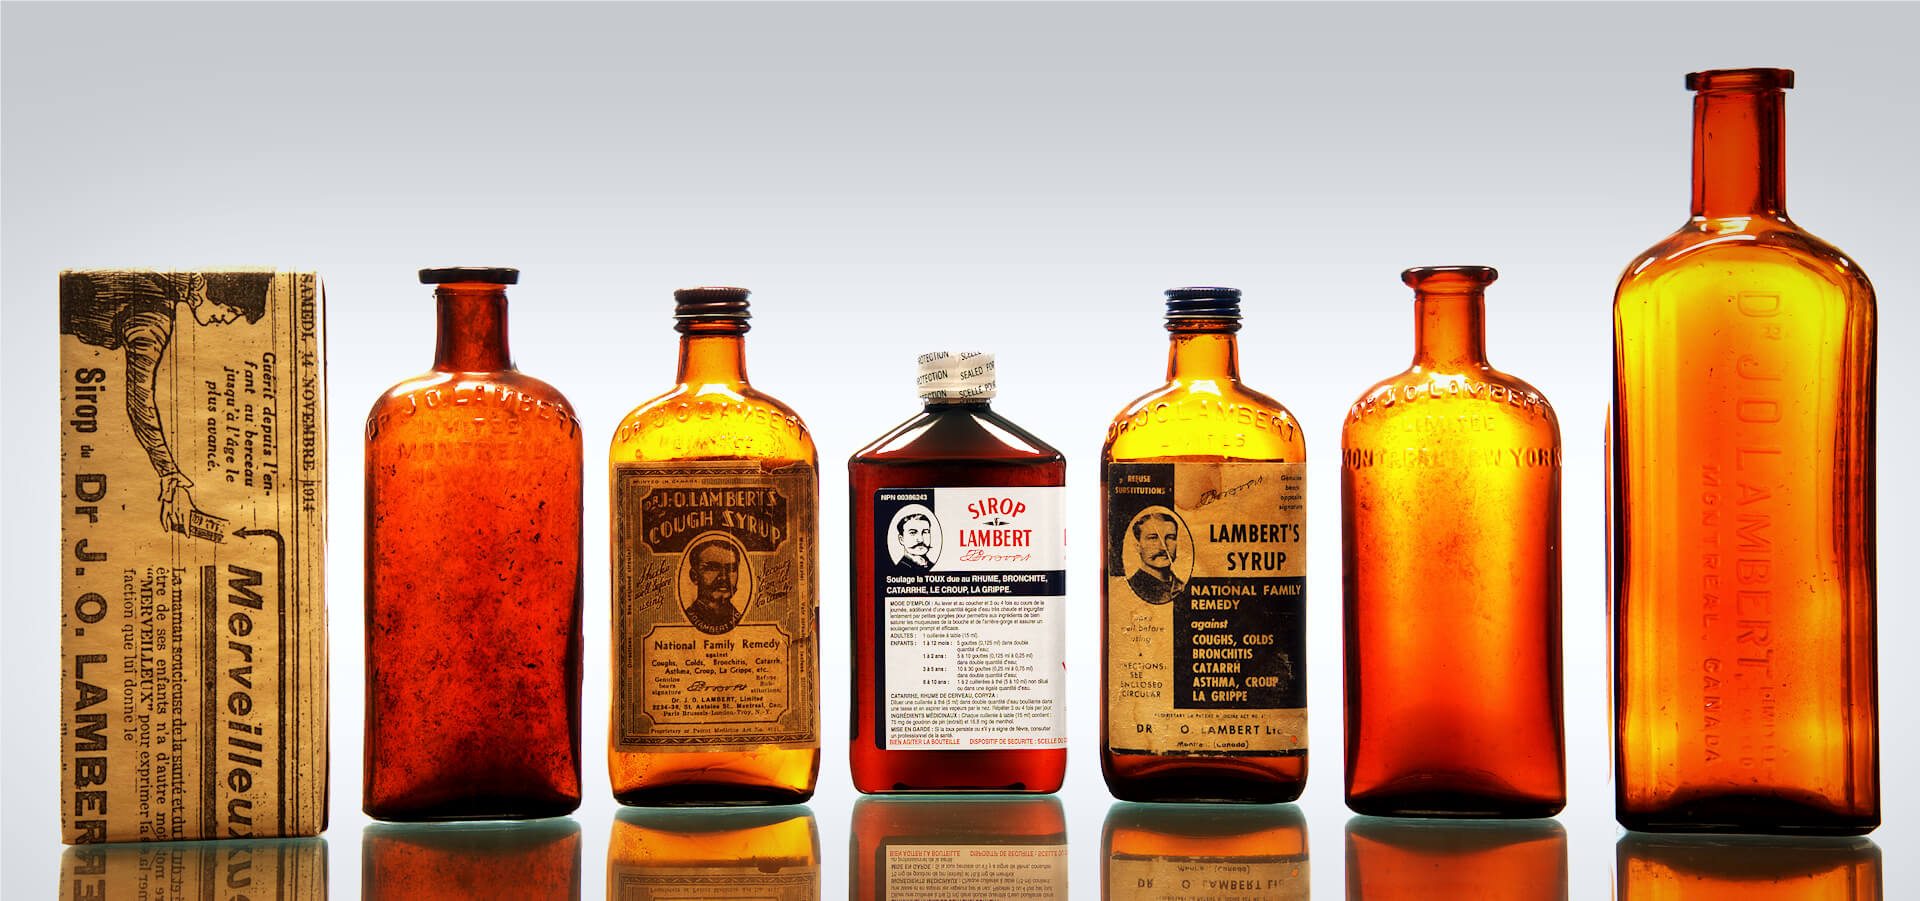 History of Lambert syrup, your natural cough syrup since more than 120 years !